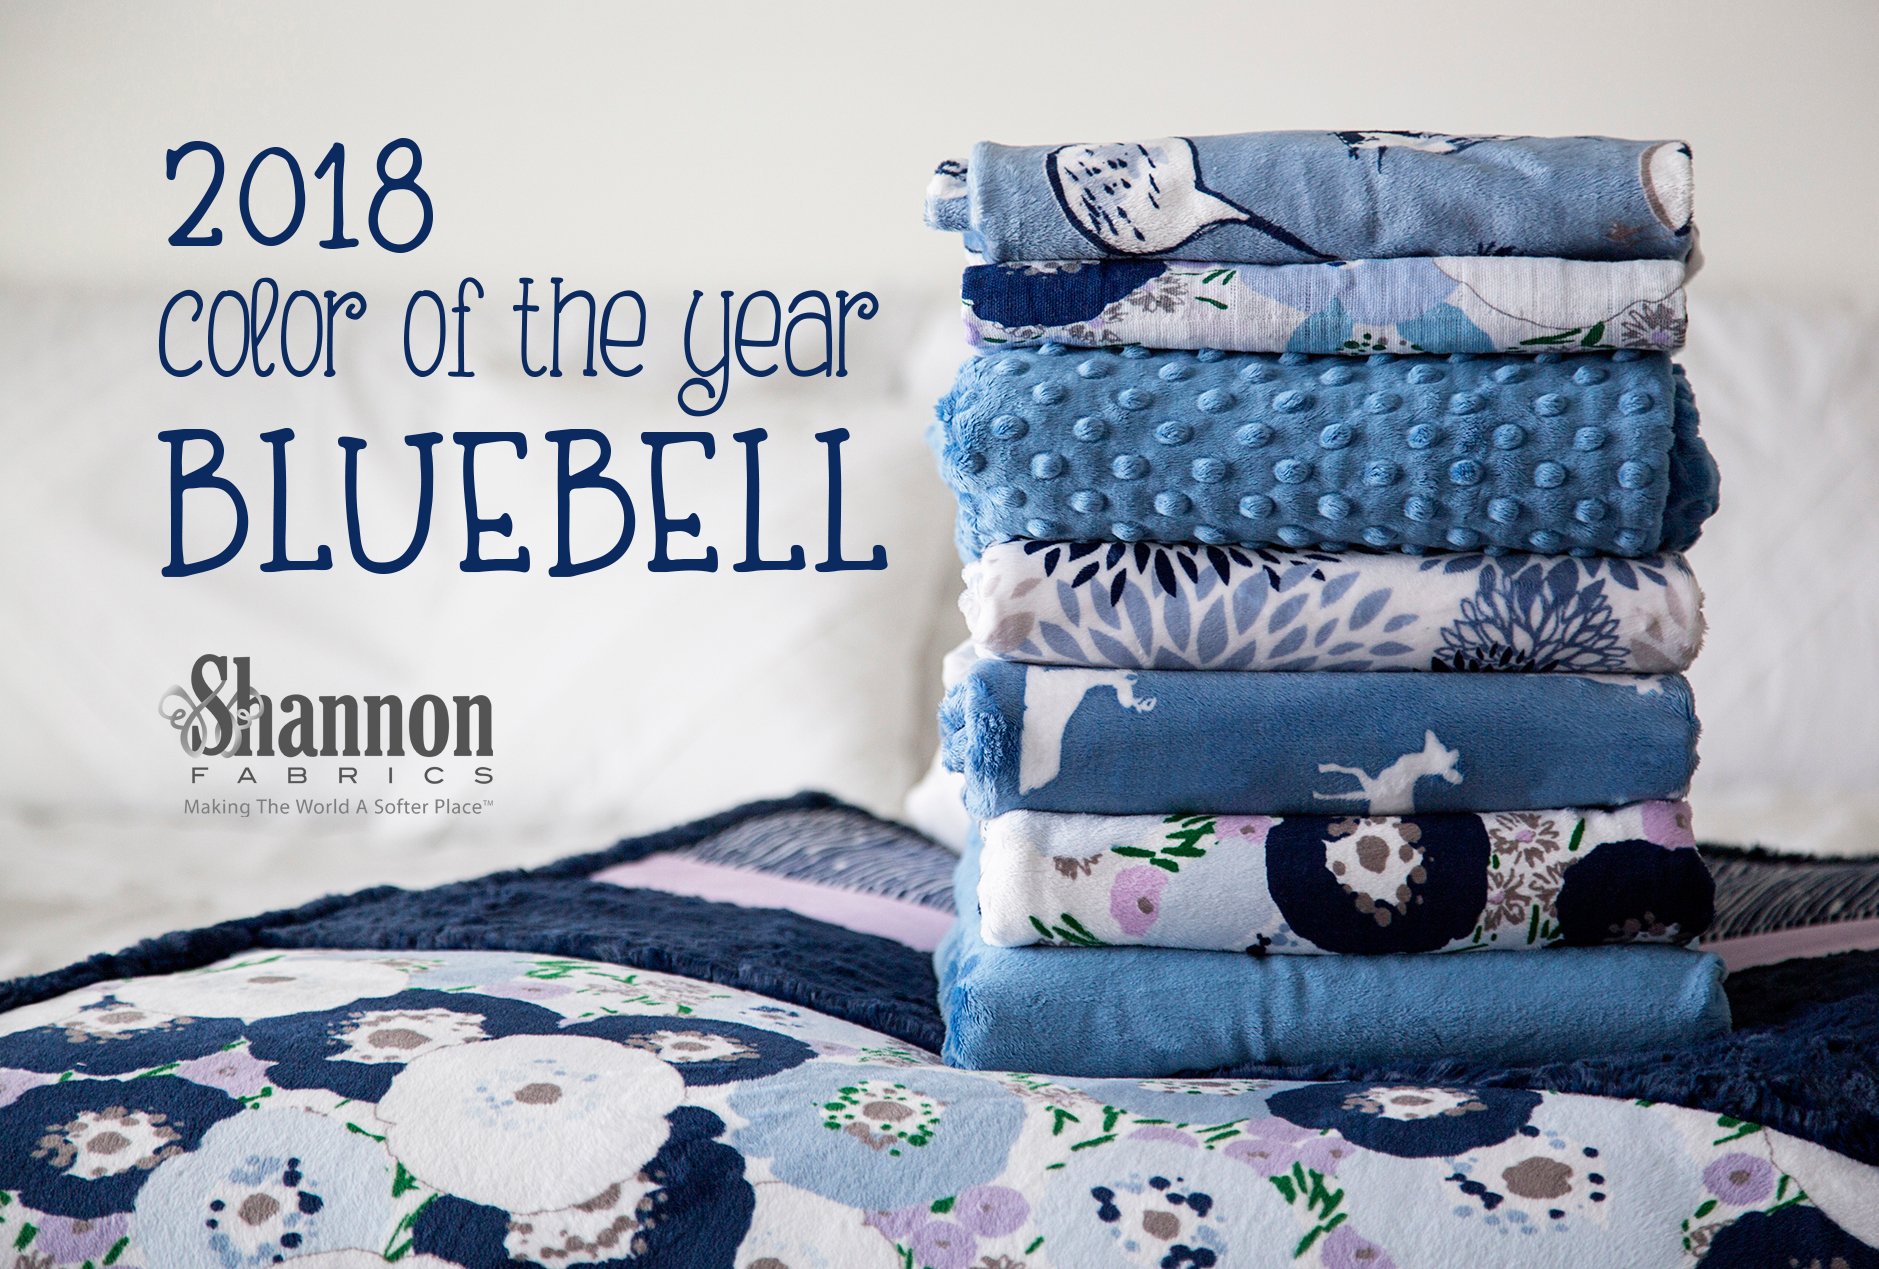 Introducing Shannon Fabrics Color Of The Year 2018 Bluebell